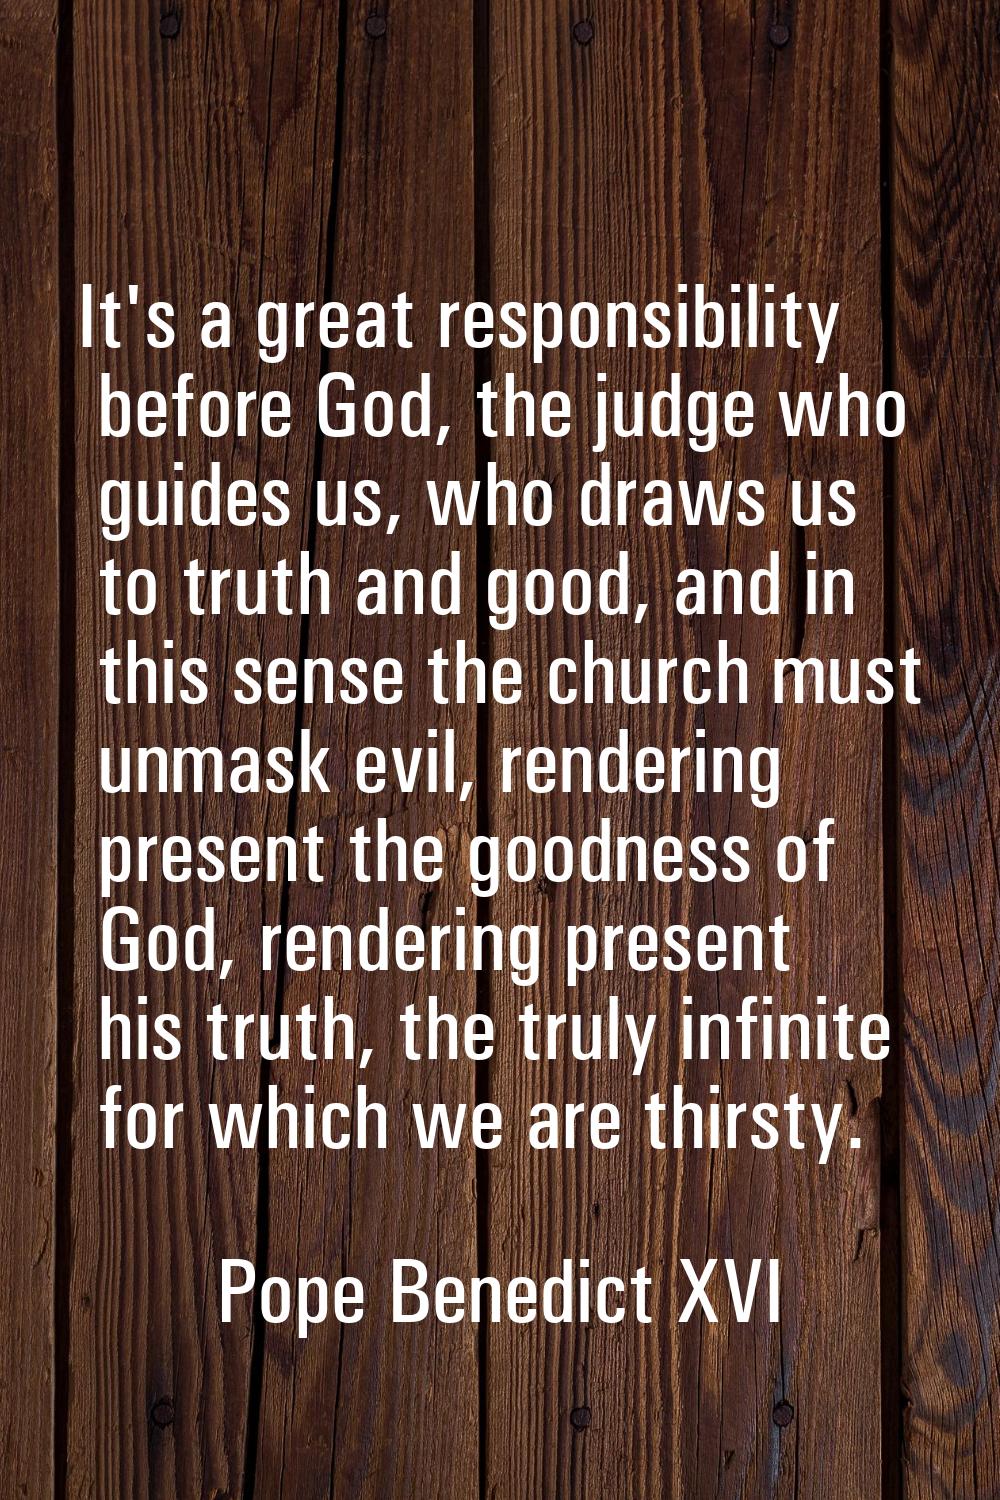 It's a great responsibility before God, the judge who guides us, who draws us to truth and good, an